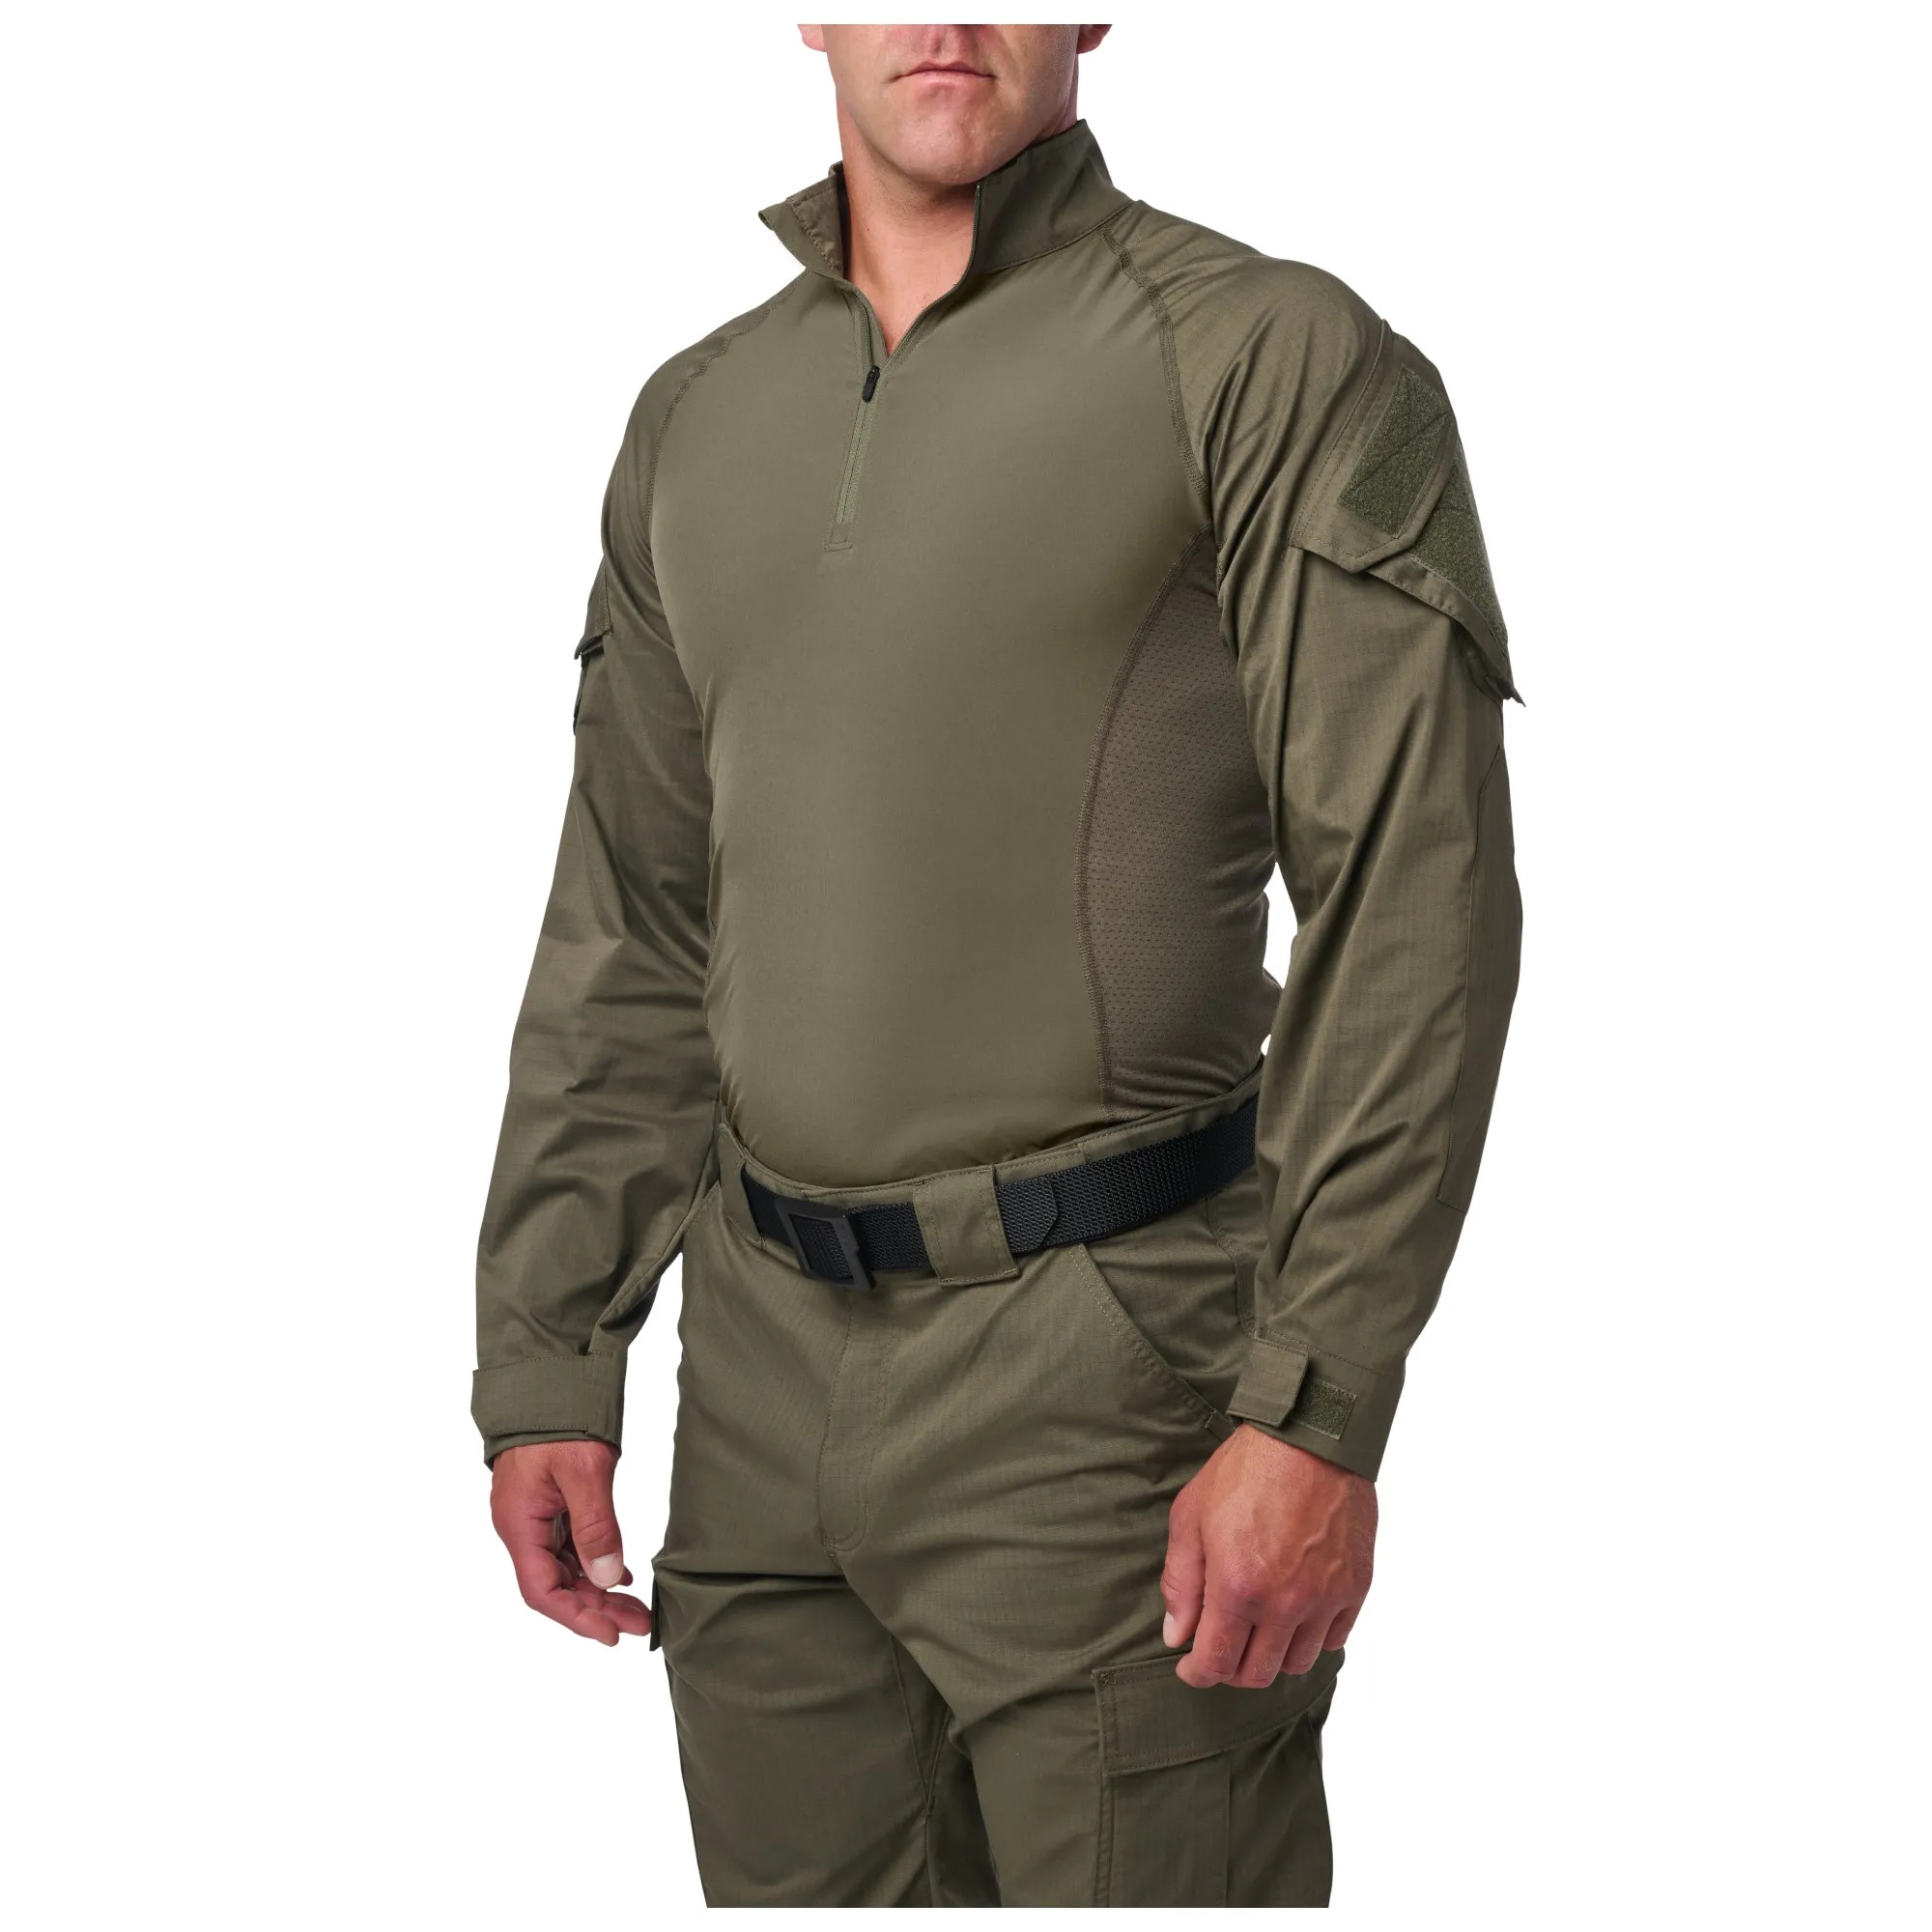 Army and civil clothes, shoes and equipment 